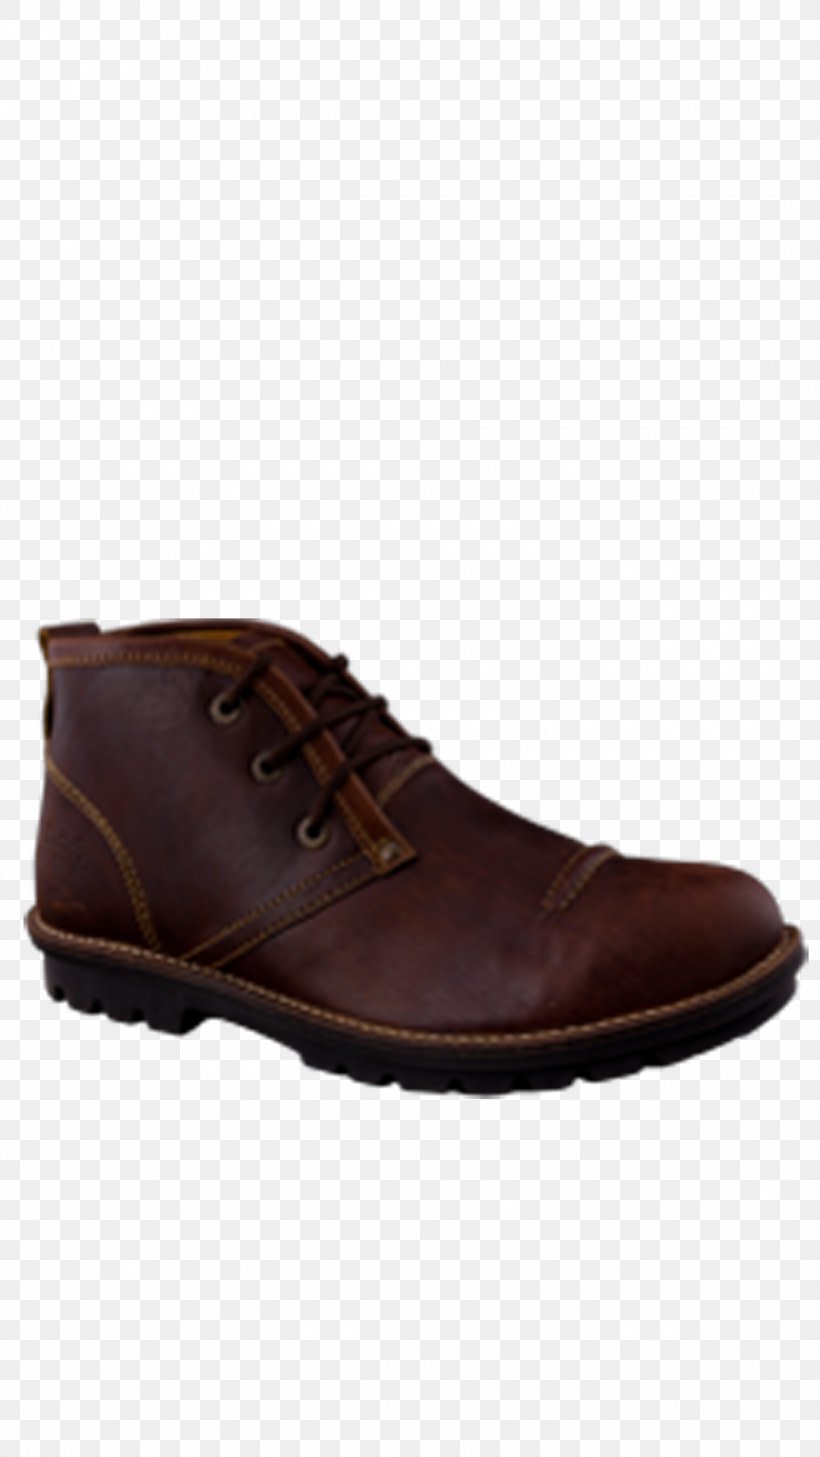 Chukka Boot Shoe Ankle Brown, PNG, 1080x1920px, Boot, Ankle, Brown, Casual, Chukka Boot Download Free